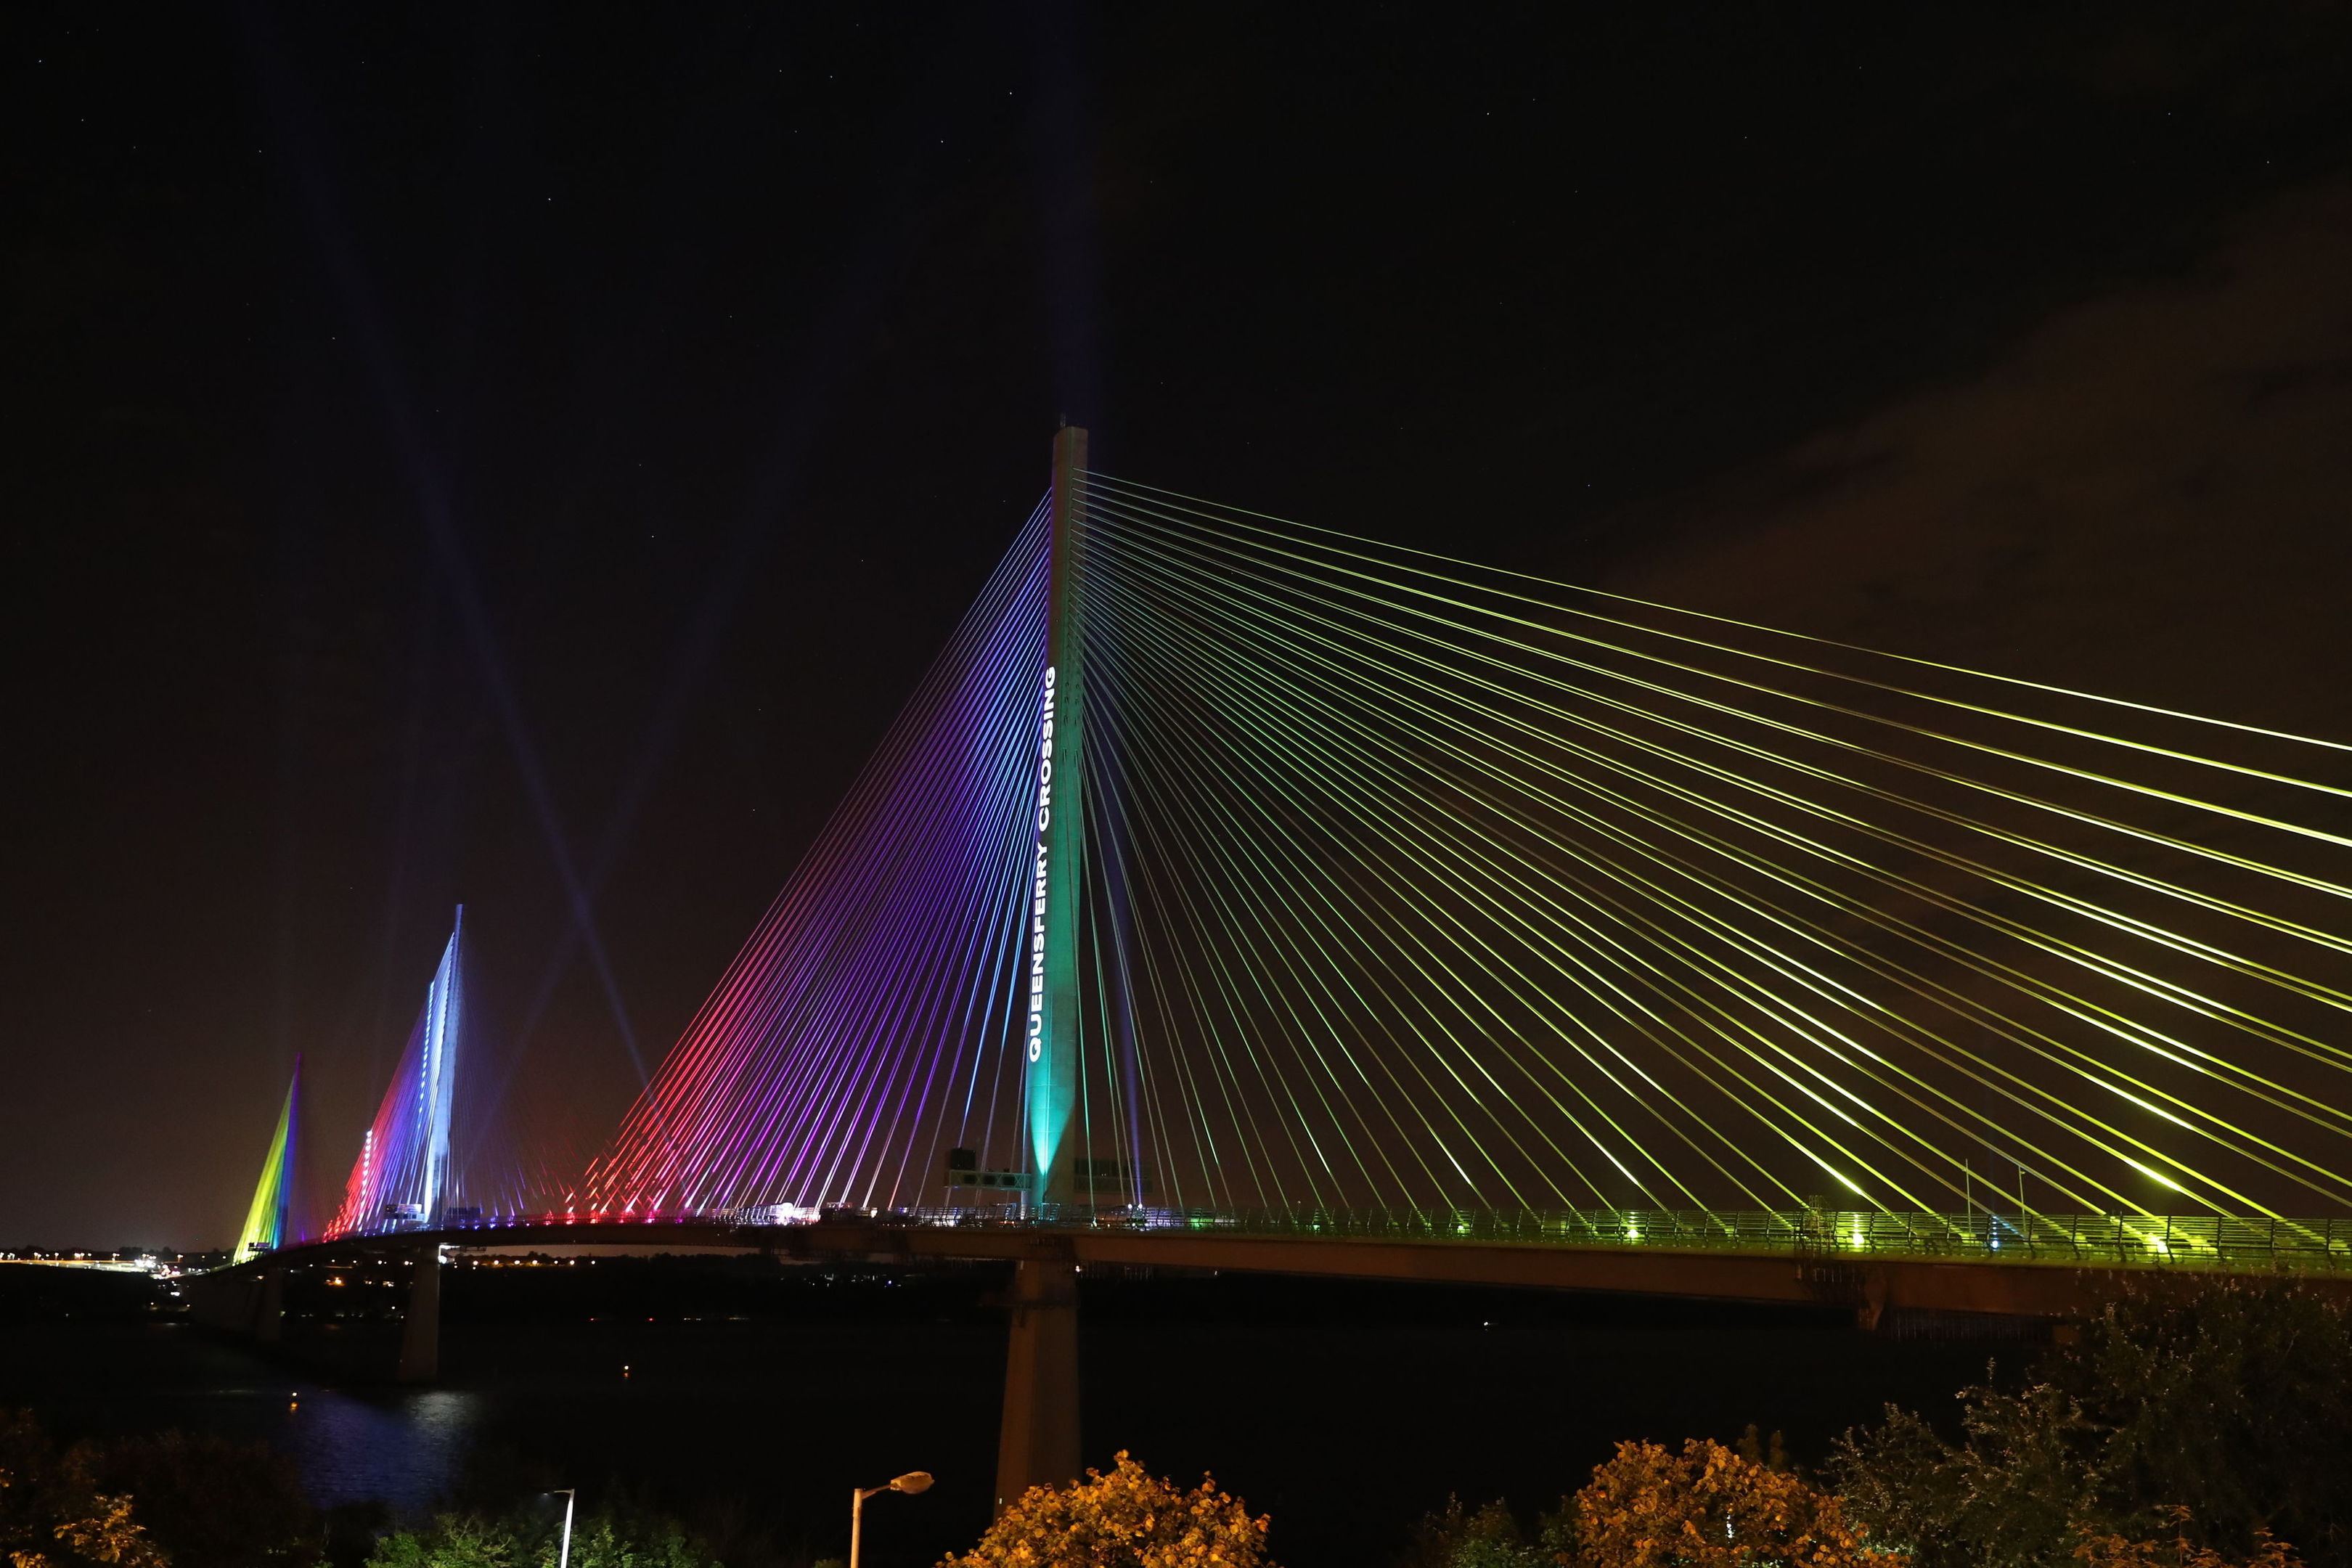 A view of the new Queensferry Crossing seen from North Queensferry, Scotland, as it is lit up during a ceremonial handover from the contractors to the Scottish Government ahead of it's official opening next month by Queen Elizabeth II on September 4. (Andrew Milligan/PA Wire)